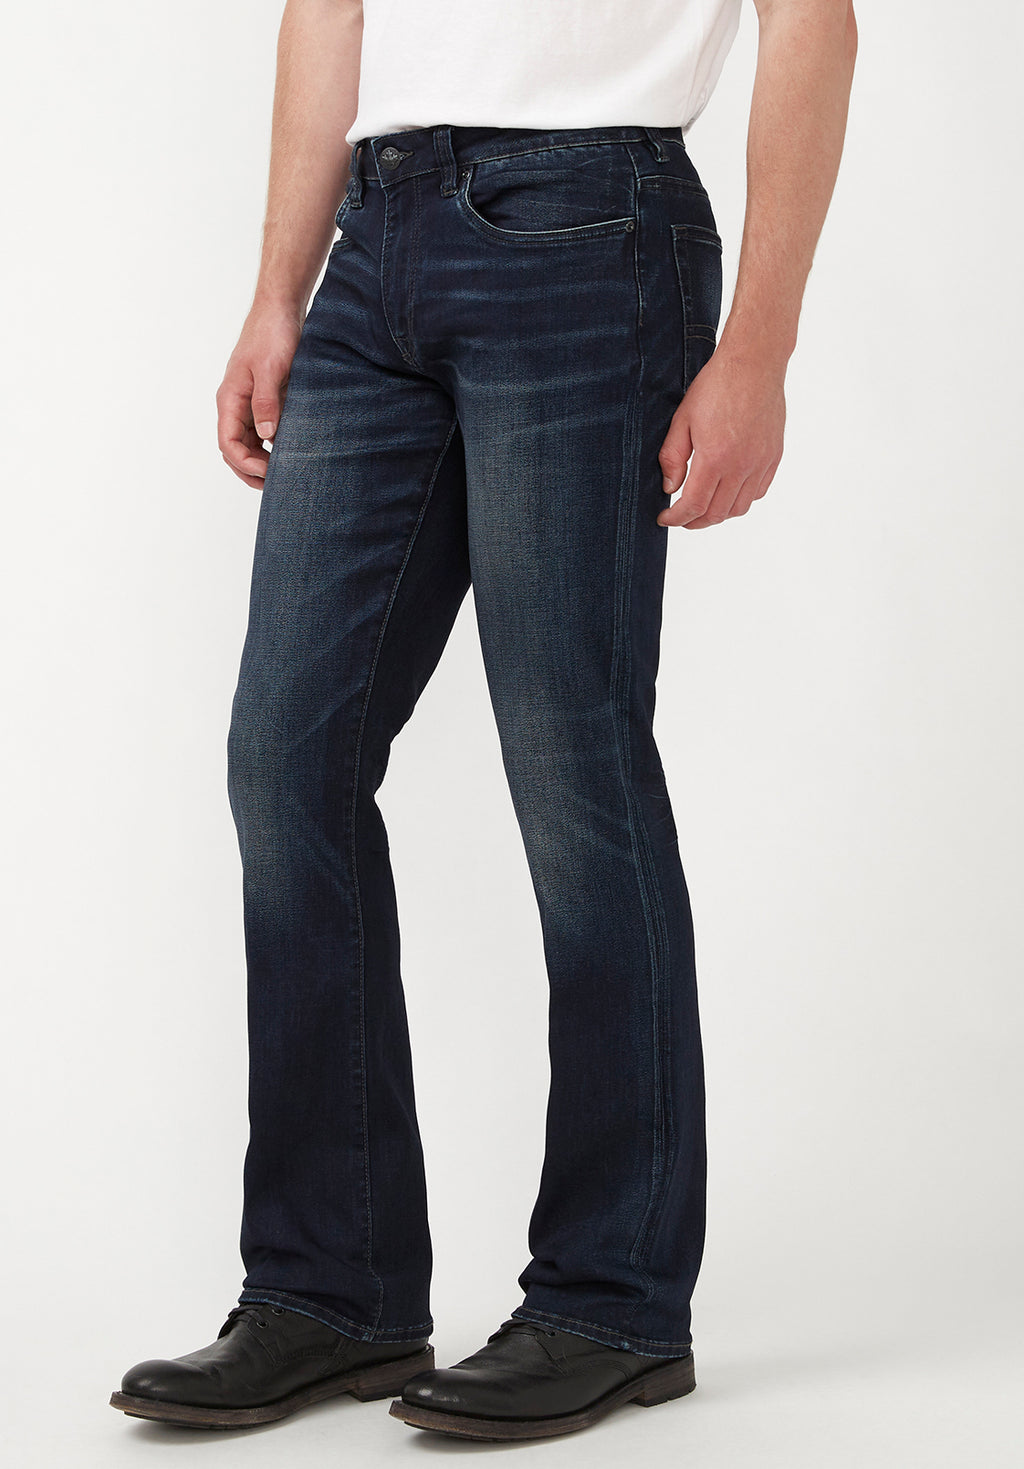 Slim Bootcut King Men's Jeans in Whiskered and Sanded Dark Blue ...